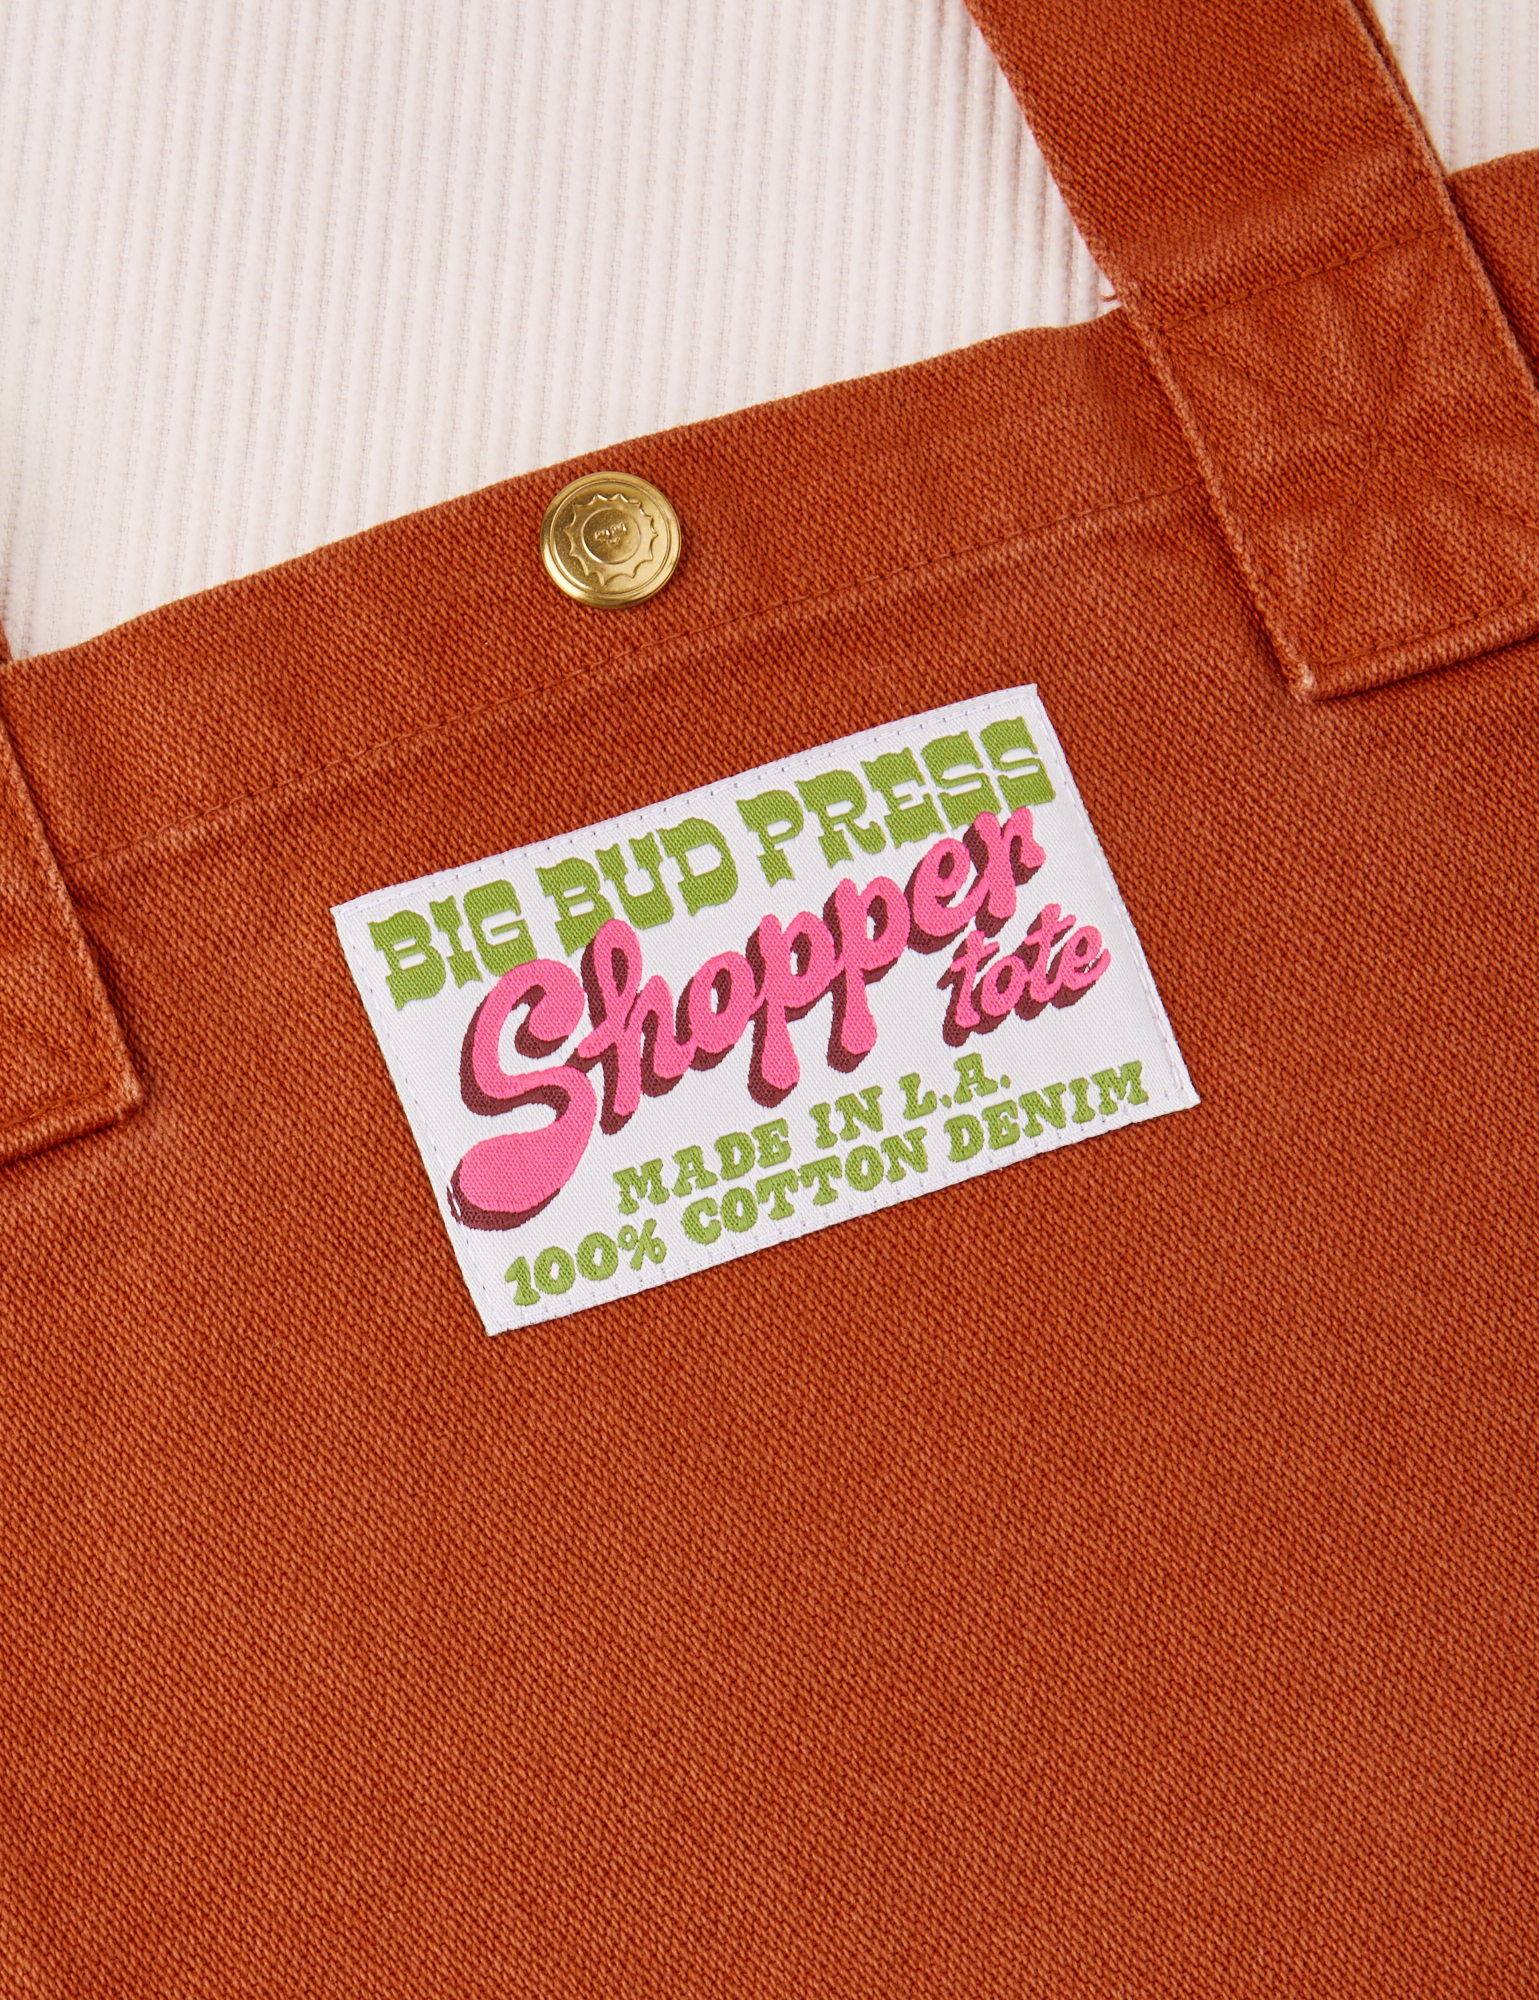 Close up of sun baby brass snap on Burnt Terracotta Shopper Tote Bag. Bag label in green and pink text that reads &quot;Big Bud Press Shopper Tote. Made in L.A, 100% Cotton Denim on a white background